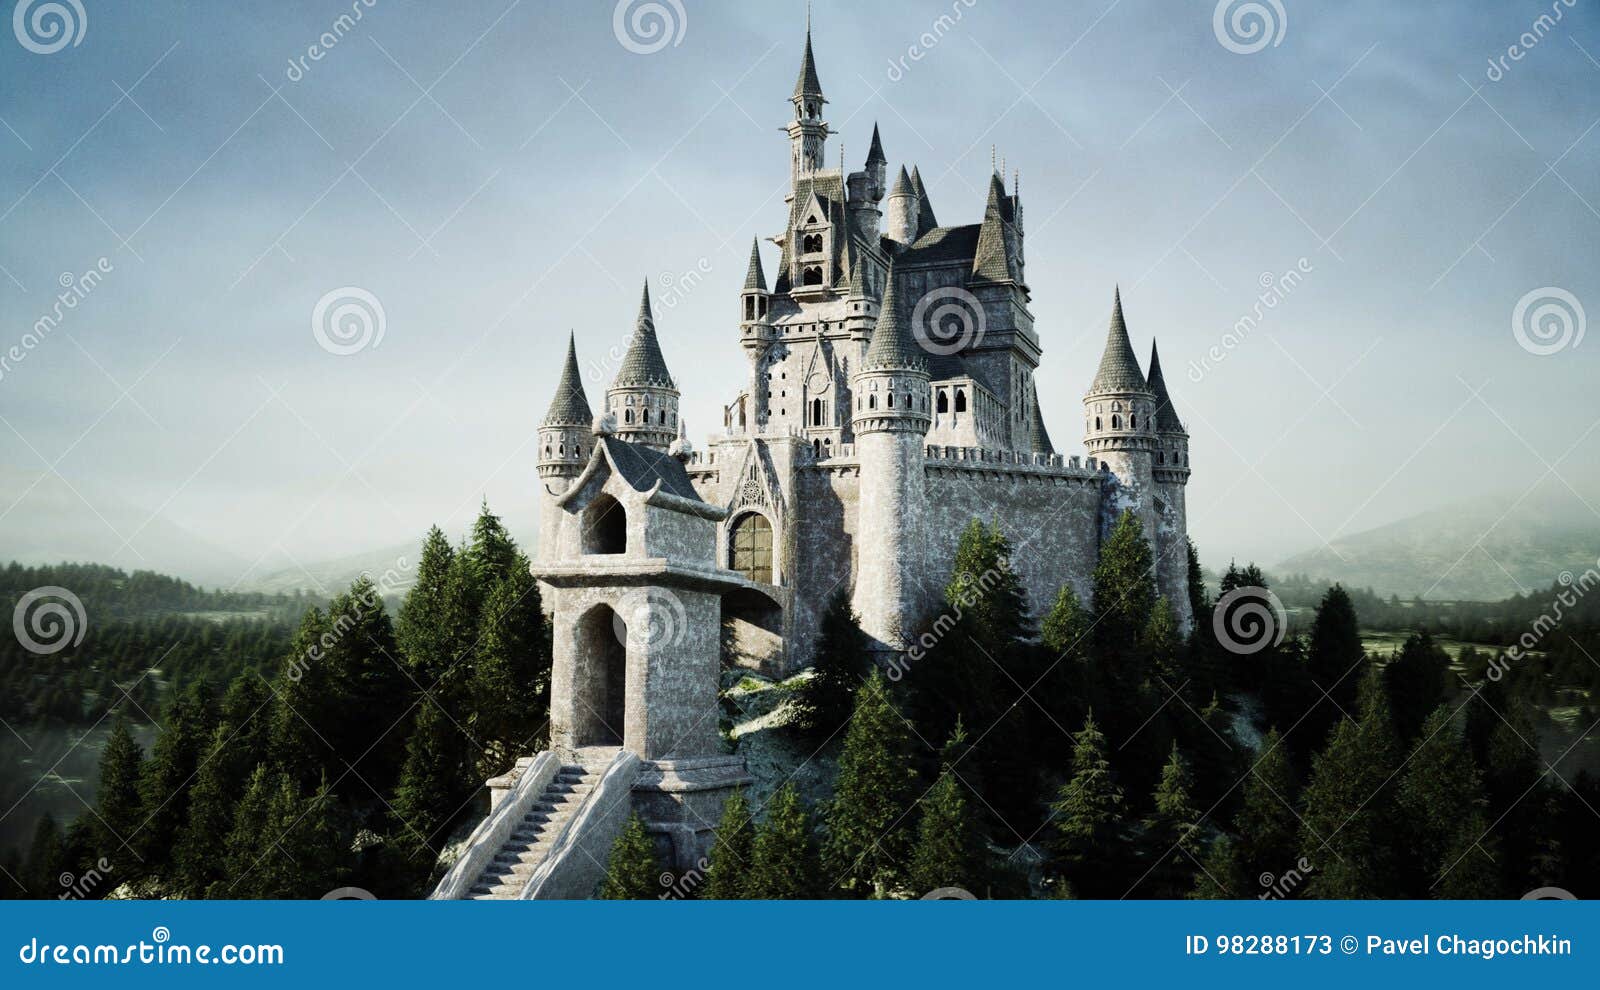 old fairytale castle on the hill. aerial view. 3d rendering.